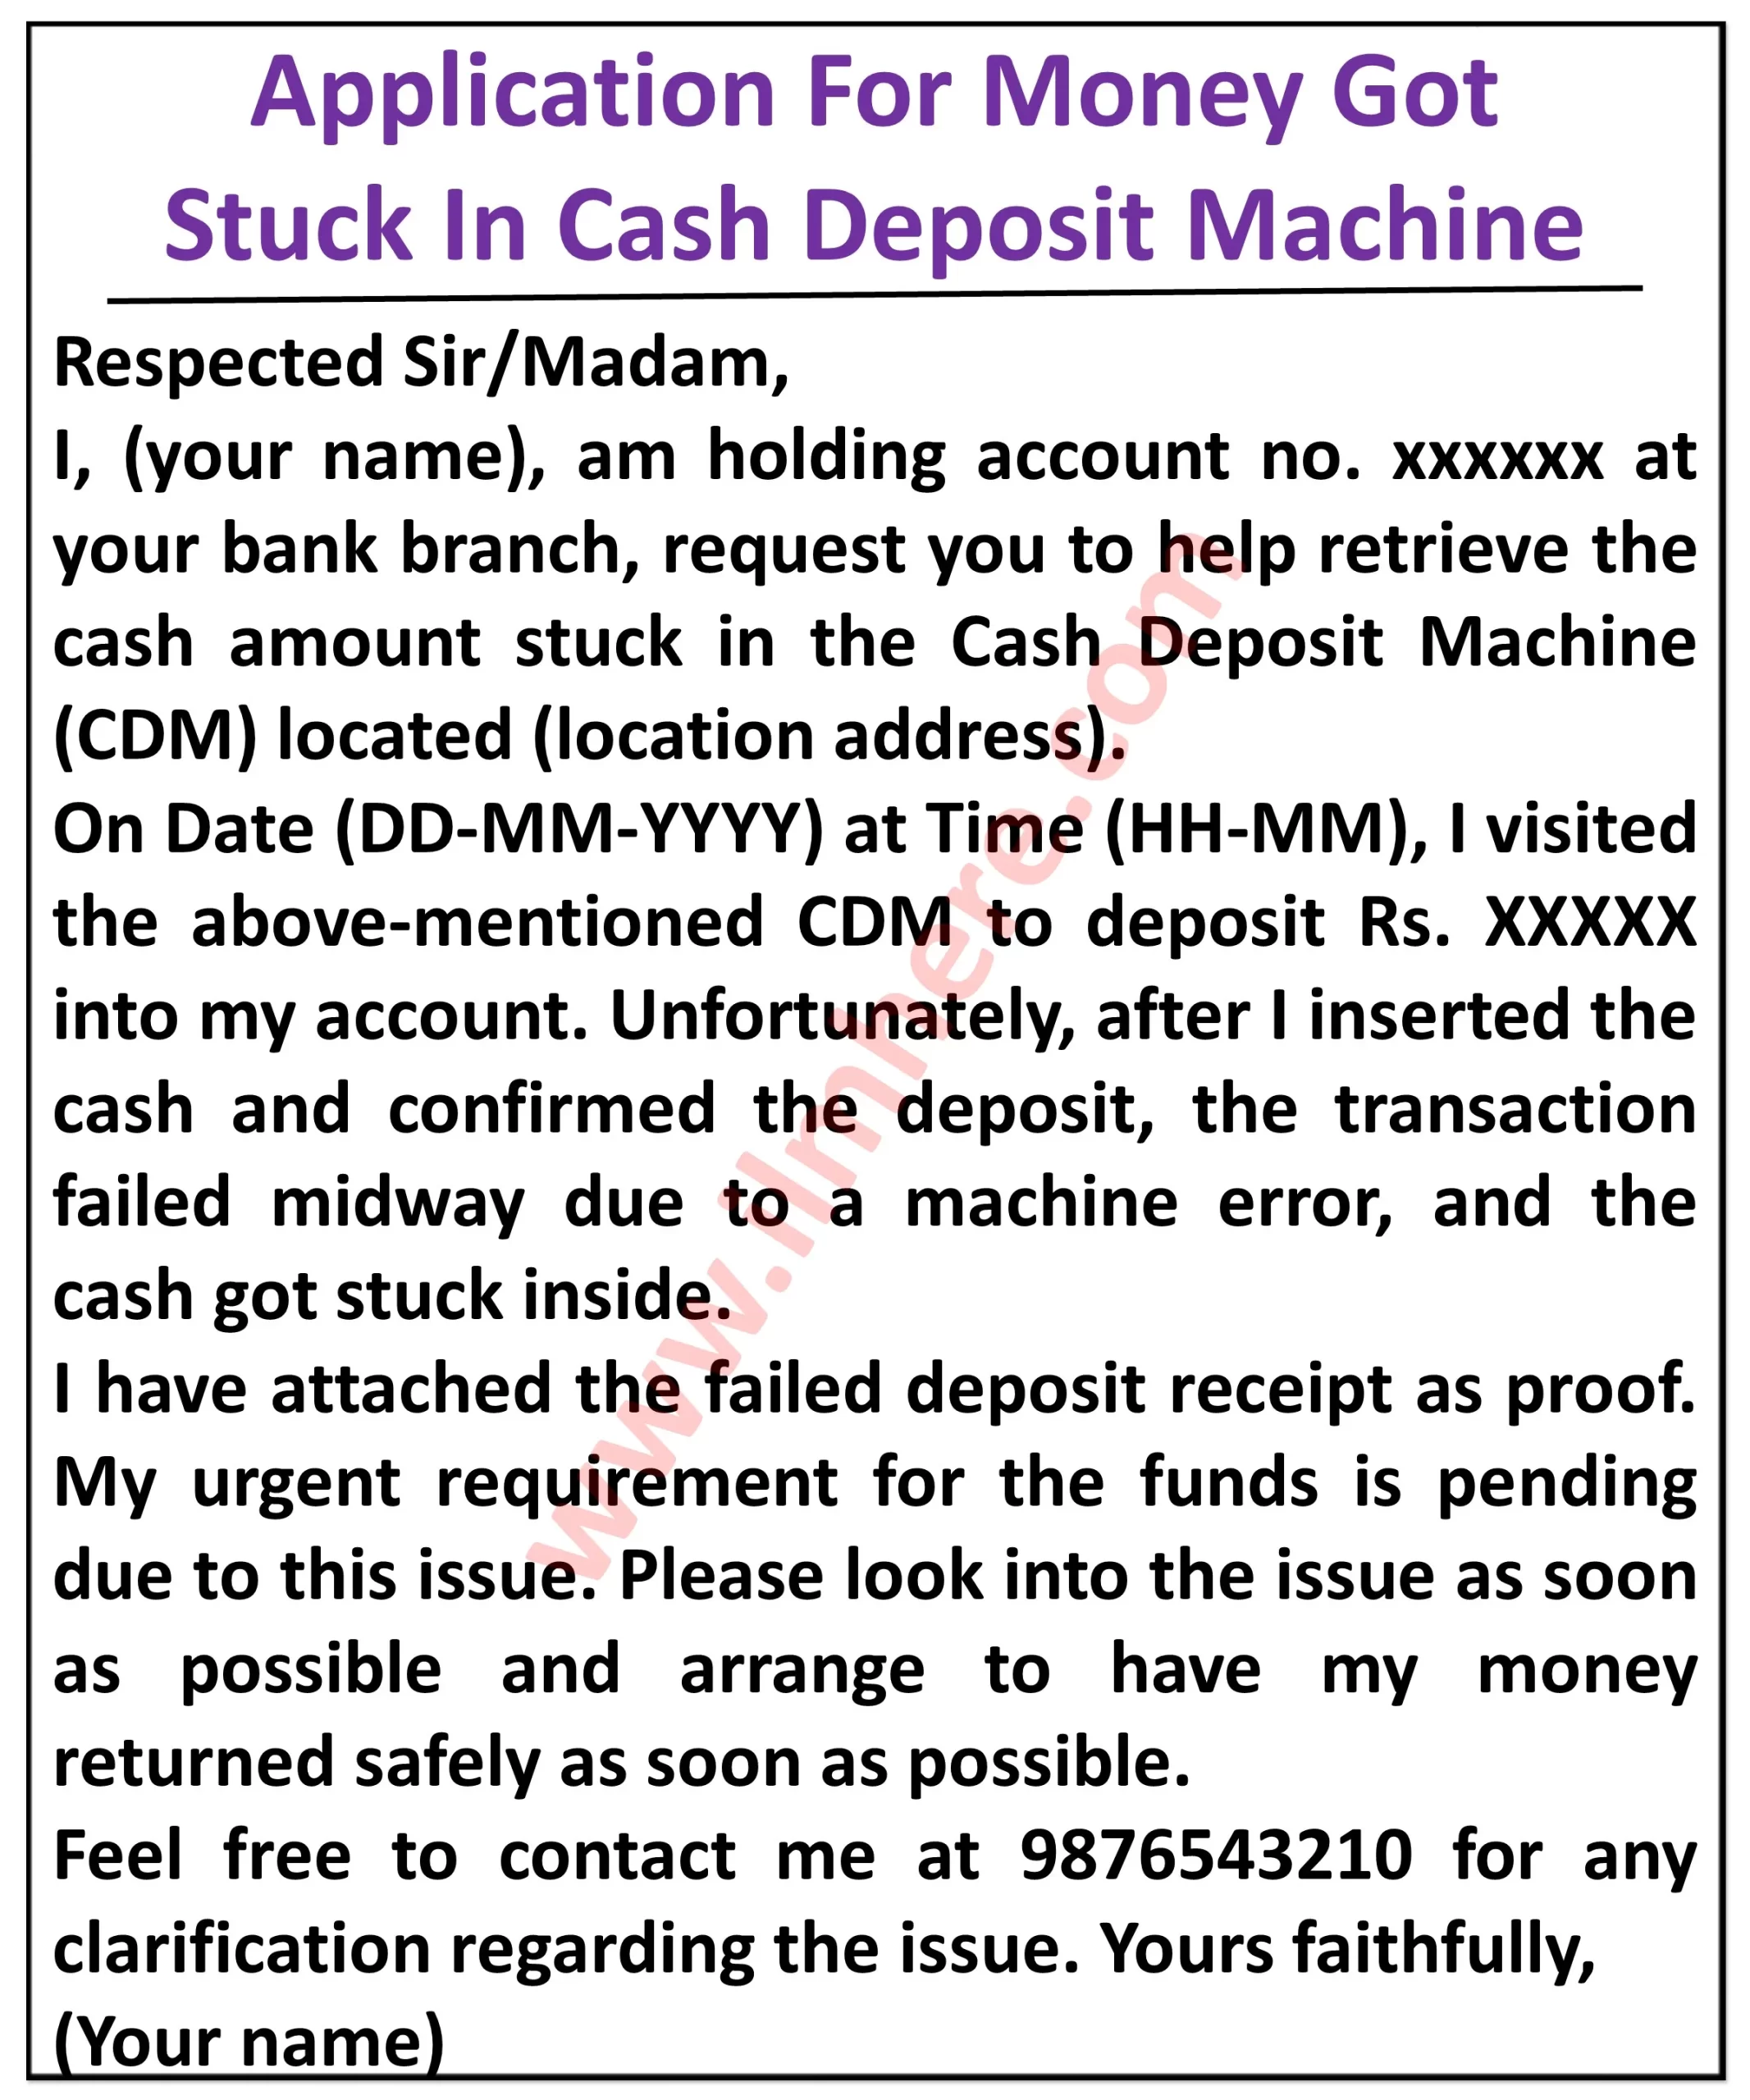 it appears to be an application form for reporting money stuck in a cash deposit machine (CDM). Here’s what I can see: Top section: It reads “Application for Money Got Stuck in Cash Deposit Machine” in bold letters. Body: It addresses the reader as “Respected Sir/Madam,” and then states the applicant’s name and account number. The applicant then requests assistance in retrieving cash that got stuck in a CDM machine. They provide details about the incident, including: Date and time: [Date and time of the incident] Location of the CDM: [Location of the CDM] Amount of cash: [Amount of cash] Transaction type: Deposit (mentioned in the image) The applicant also mentions attaching a copy of the failed deposit receipt as proof. They express the urgency of retrieving the cash due to [reason for urgency]. Closing: The applicant requests the bank to look into the matter as soon as possible and arrange for the safe return of their money. They provide their contact information for further clarification. The application is signed with the applicant’s full name. Overall, the application is a formal request to the bank to help retrieve cash that got stuck in a CDM machine during a deposit transaction. The applicant provides all the necessary details about the incident and the amount of cash that is stuck.